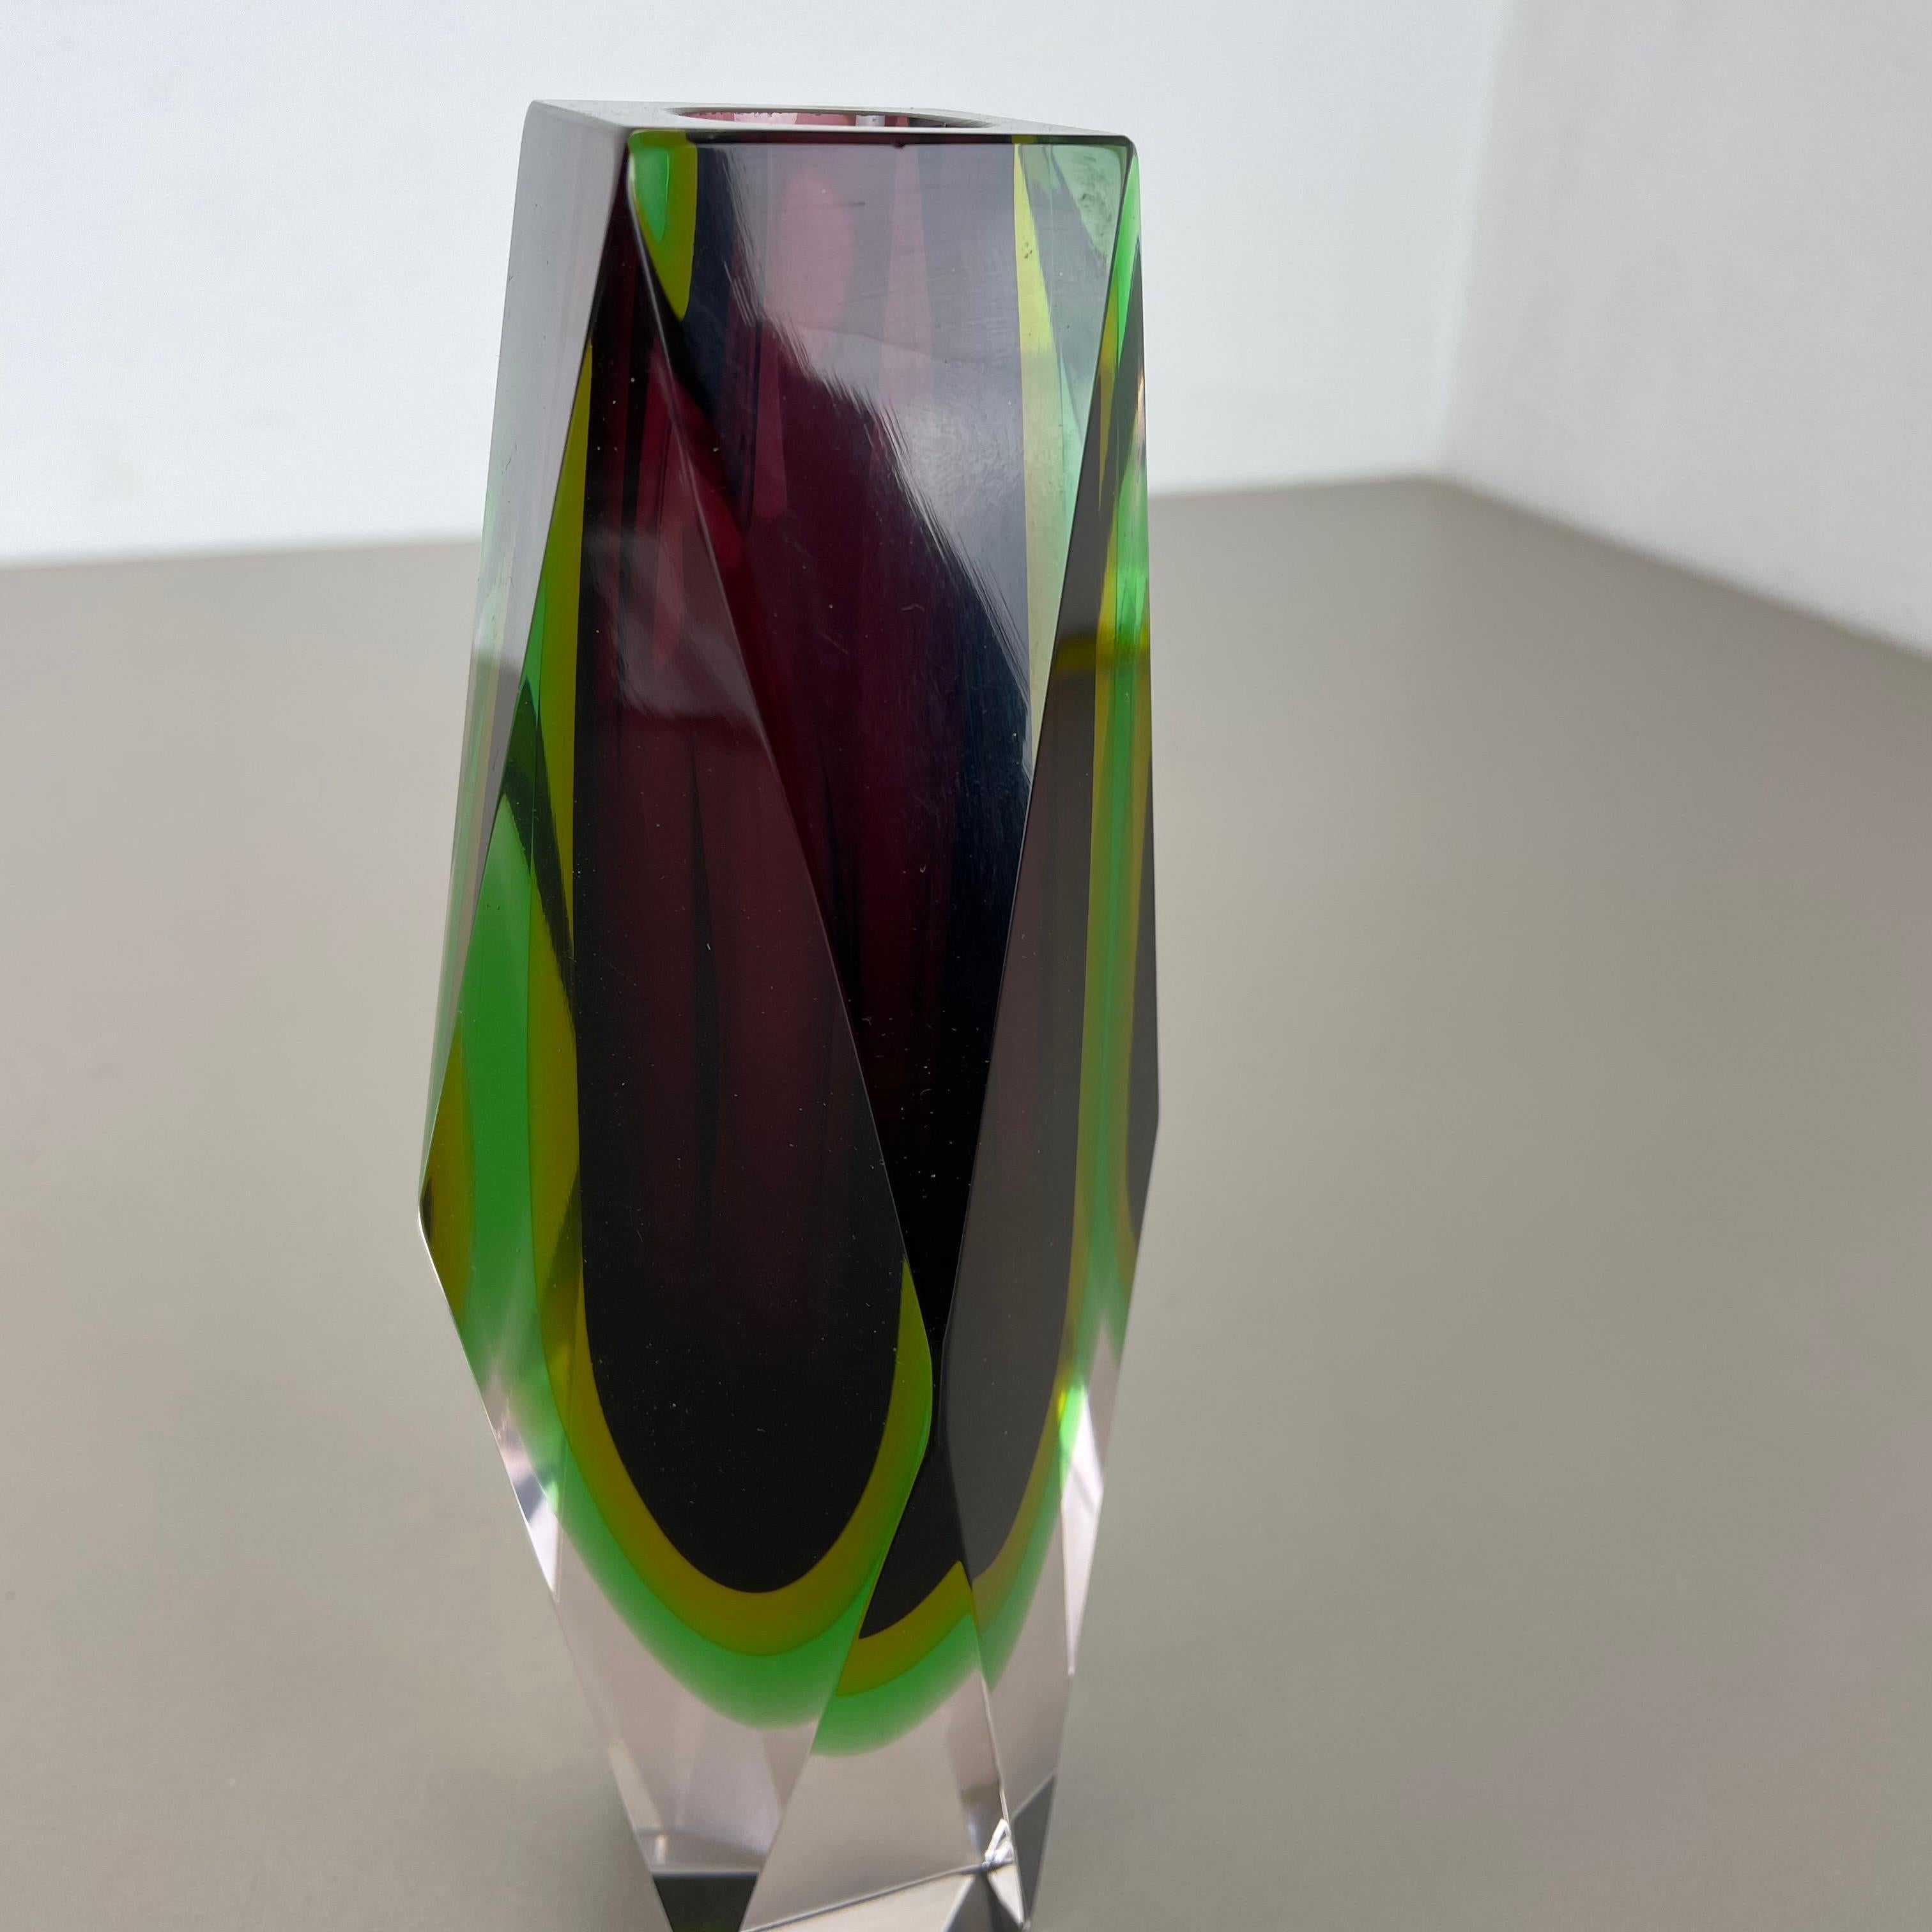 Heavy Large Murano Glass Sommerso 4 Colors Vase by Flavio Poli, Italy, 1970s For Sale 5